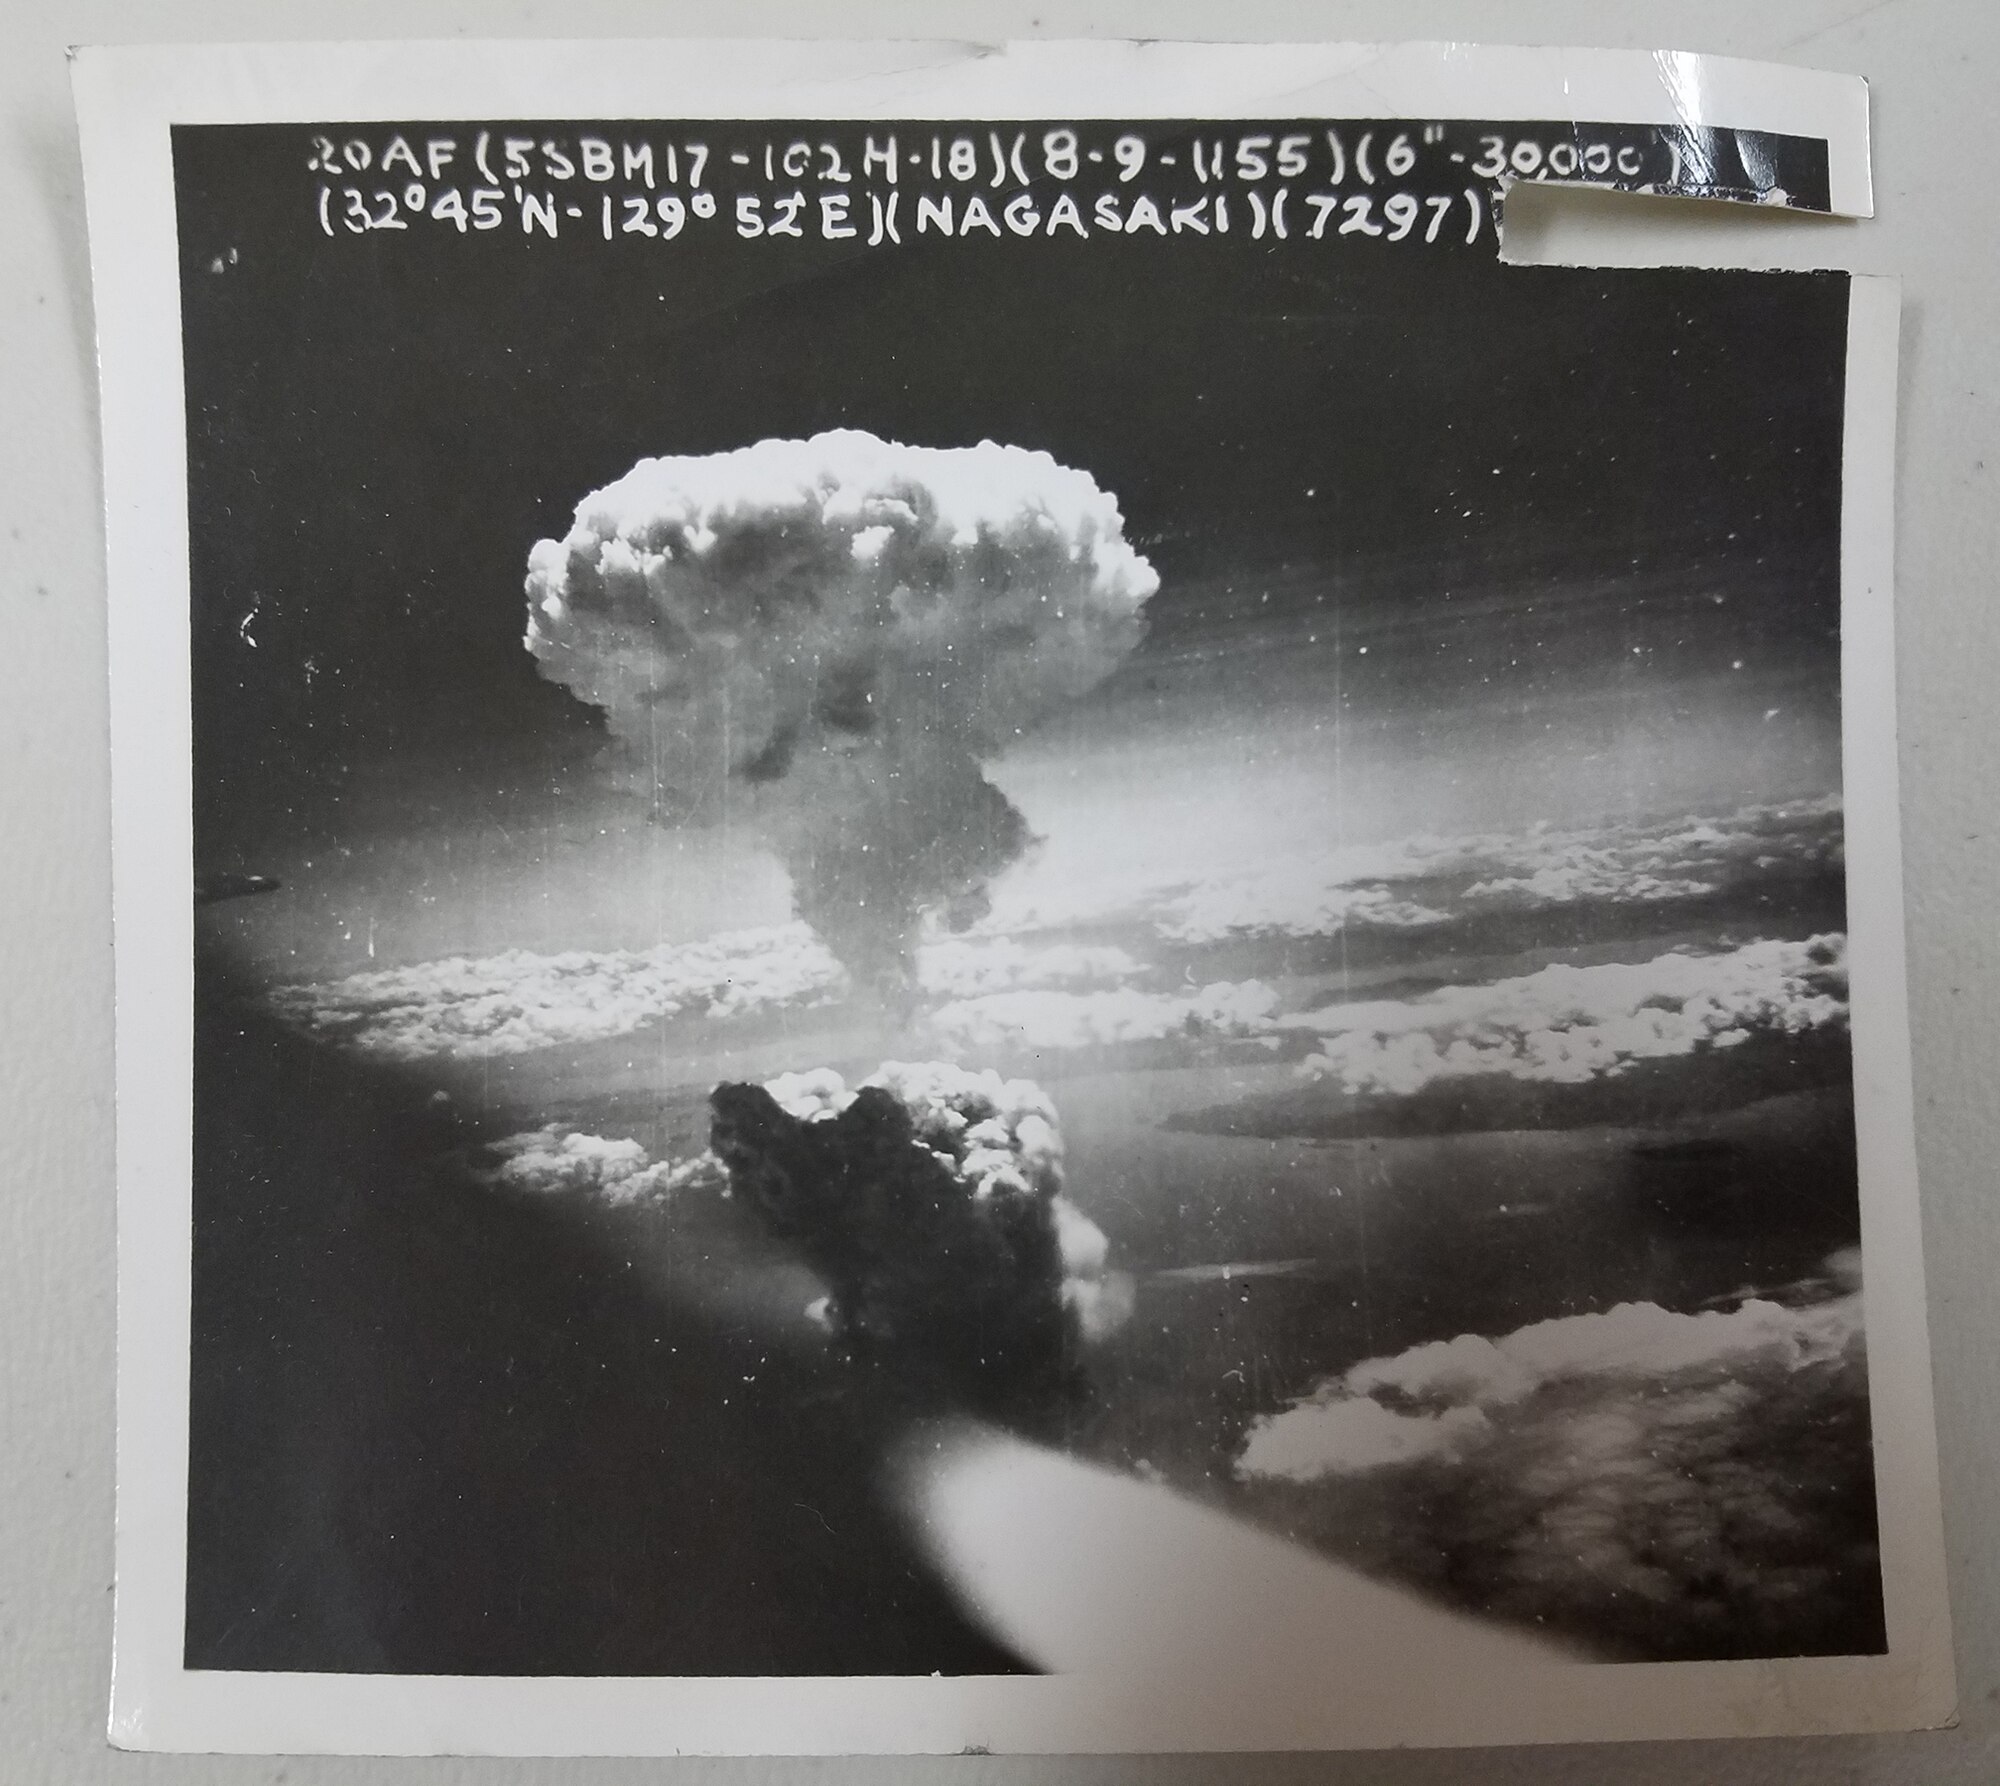 WRIGHT-PATTERSON AIR FORCE BASE, Ohio –World War II veteran John Johnson, who served in the 9th Photographic Technical Squadron during the time of the atomic strikes on Hiroshima and Nagasaki, shares a historic photo of the atomic strikes during his visit with Lt. Col. Dianne Hickey, 14th Intelligence Squadron commander, June 15, 2016. Johnson was discovered after two years of historical research by the 14th IS as the unit tried to uncover its lineage. (Courtesy photo)